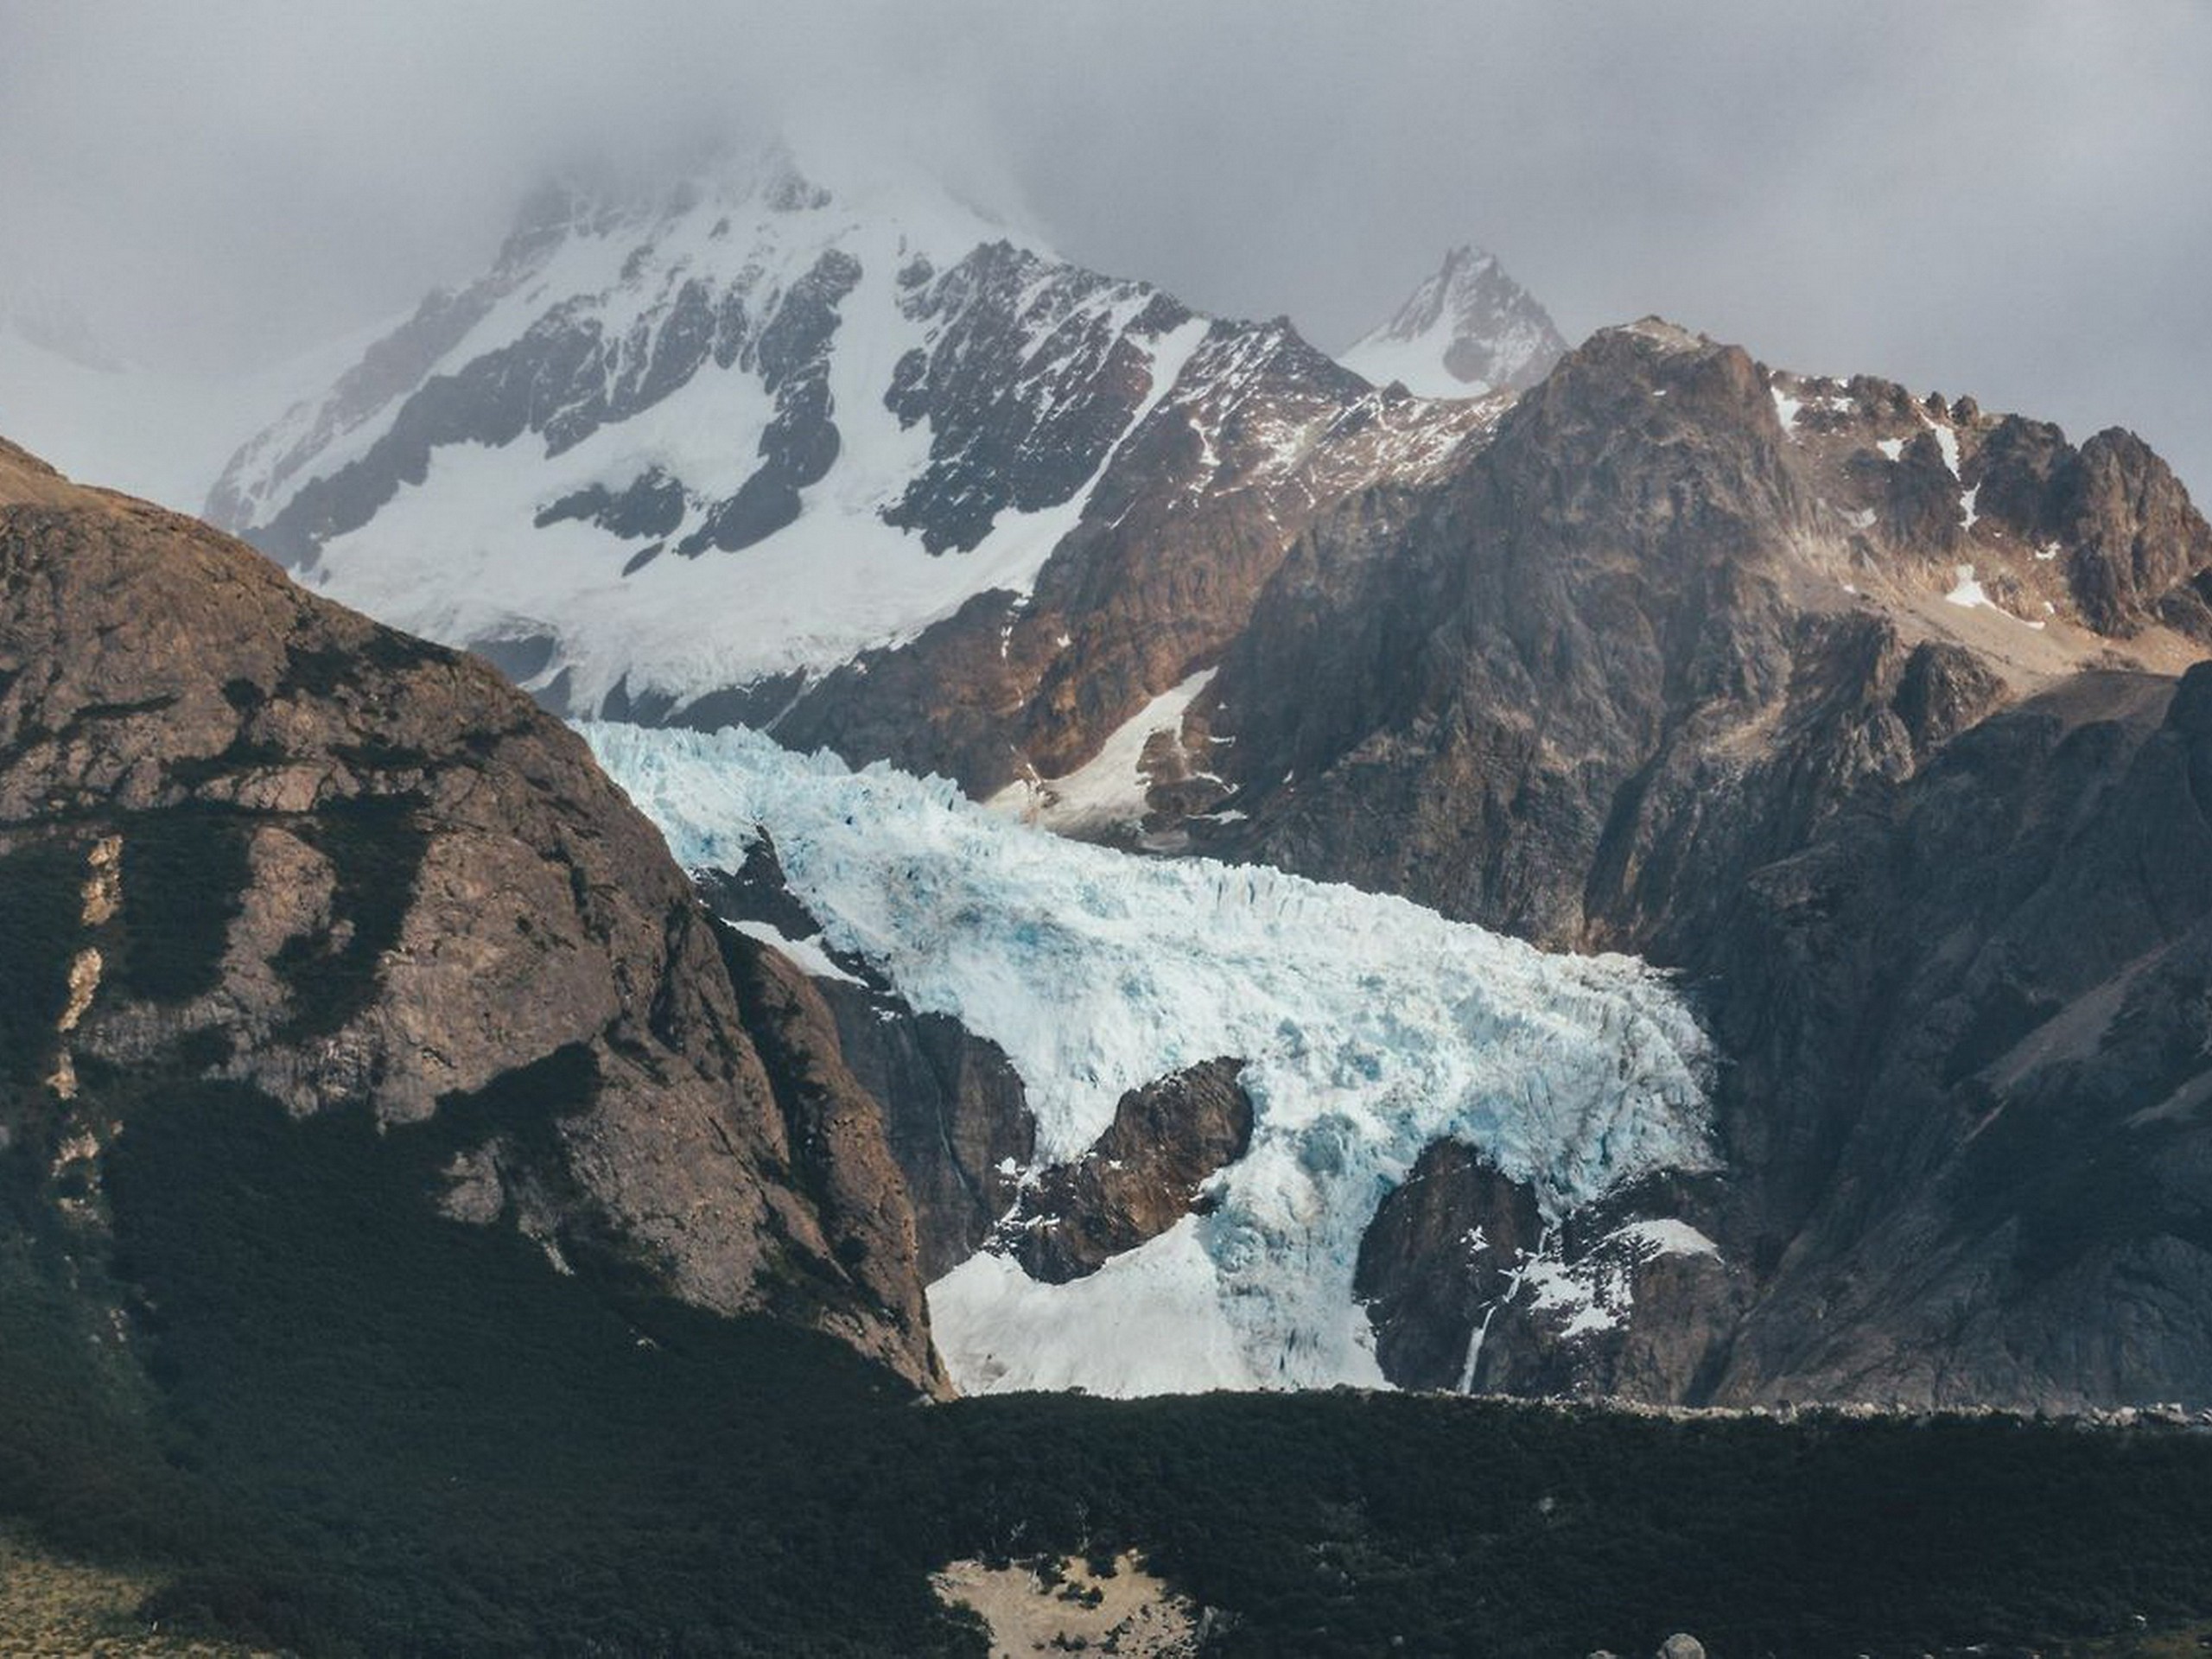 Beautiful glacier seen in Patagonia while on a self-drive tour